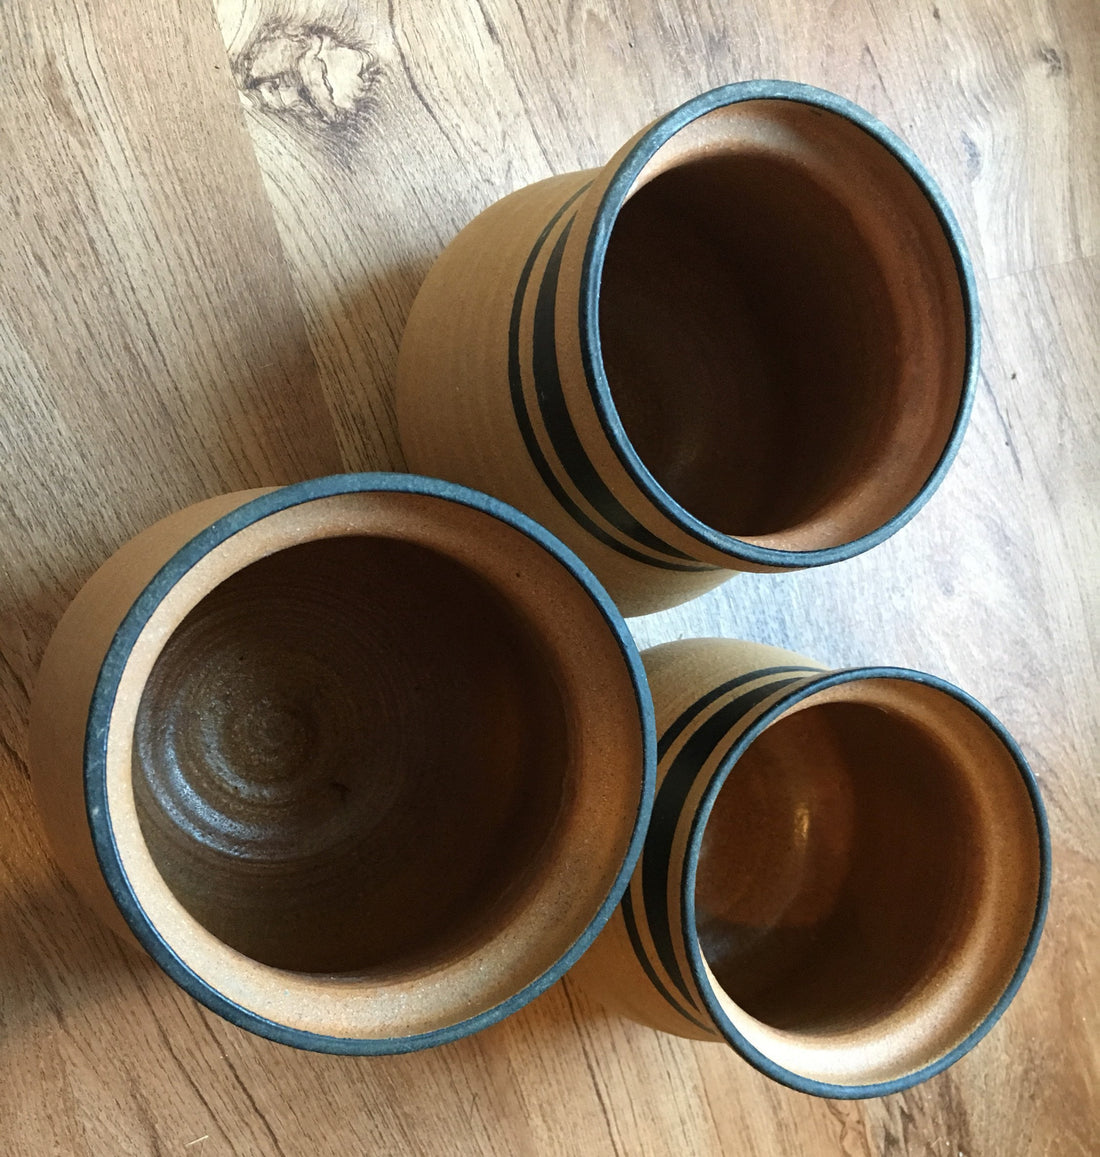 2 Left!!! Neutral Earthenware Ceramic Pottery Canisters (Sold Separately)